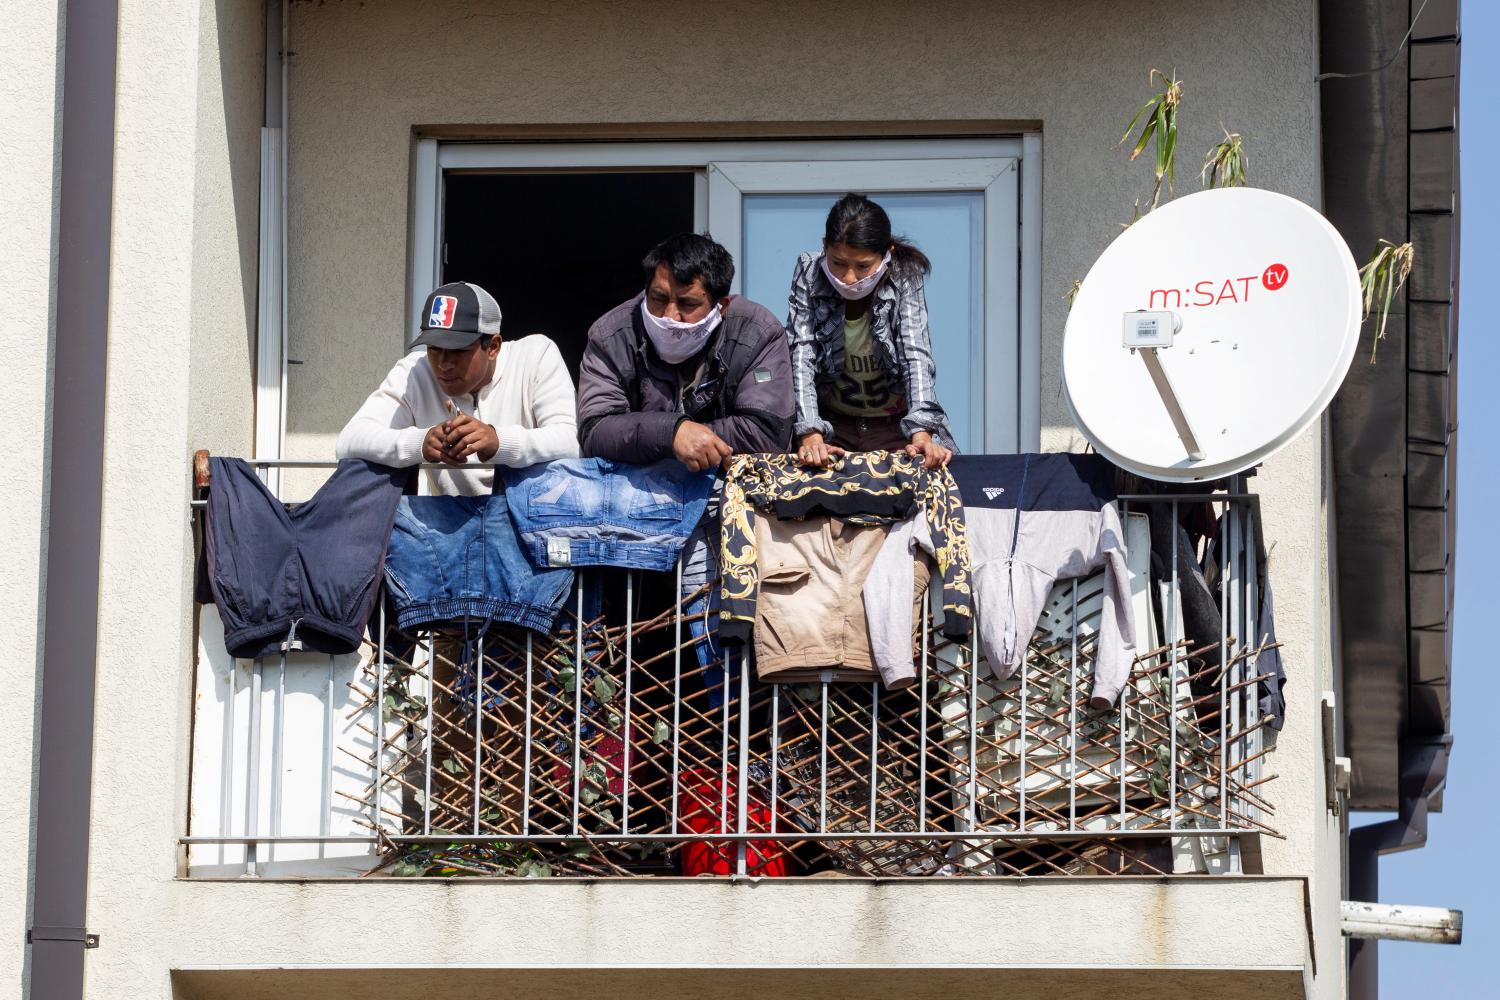 People watch supplies distribution from their balconies in Roma community in Podgorica amid coronavirus disease (COVID-19) fears, Montenegro March 29, 2020. REUTERS/Stevo Vasiljevic